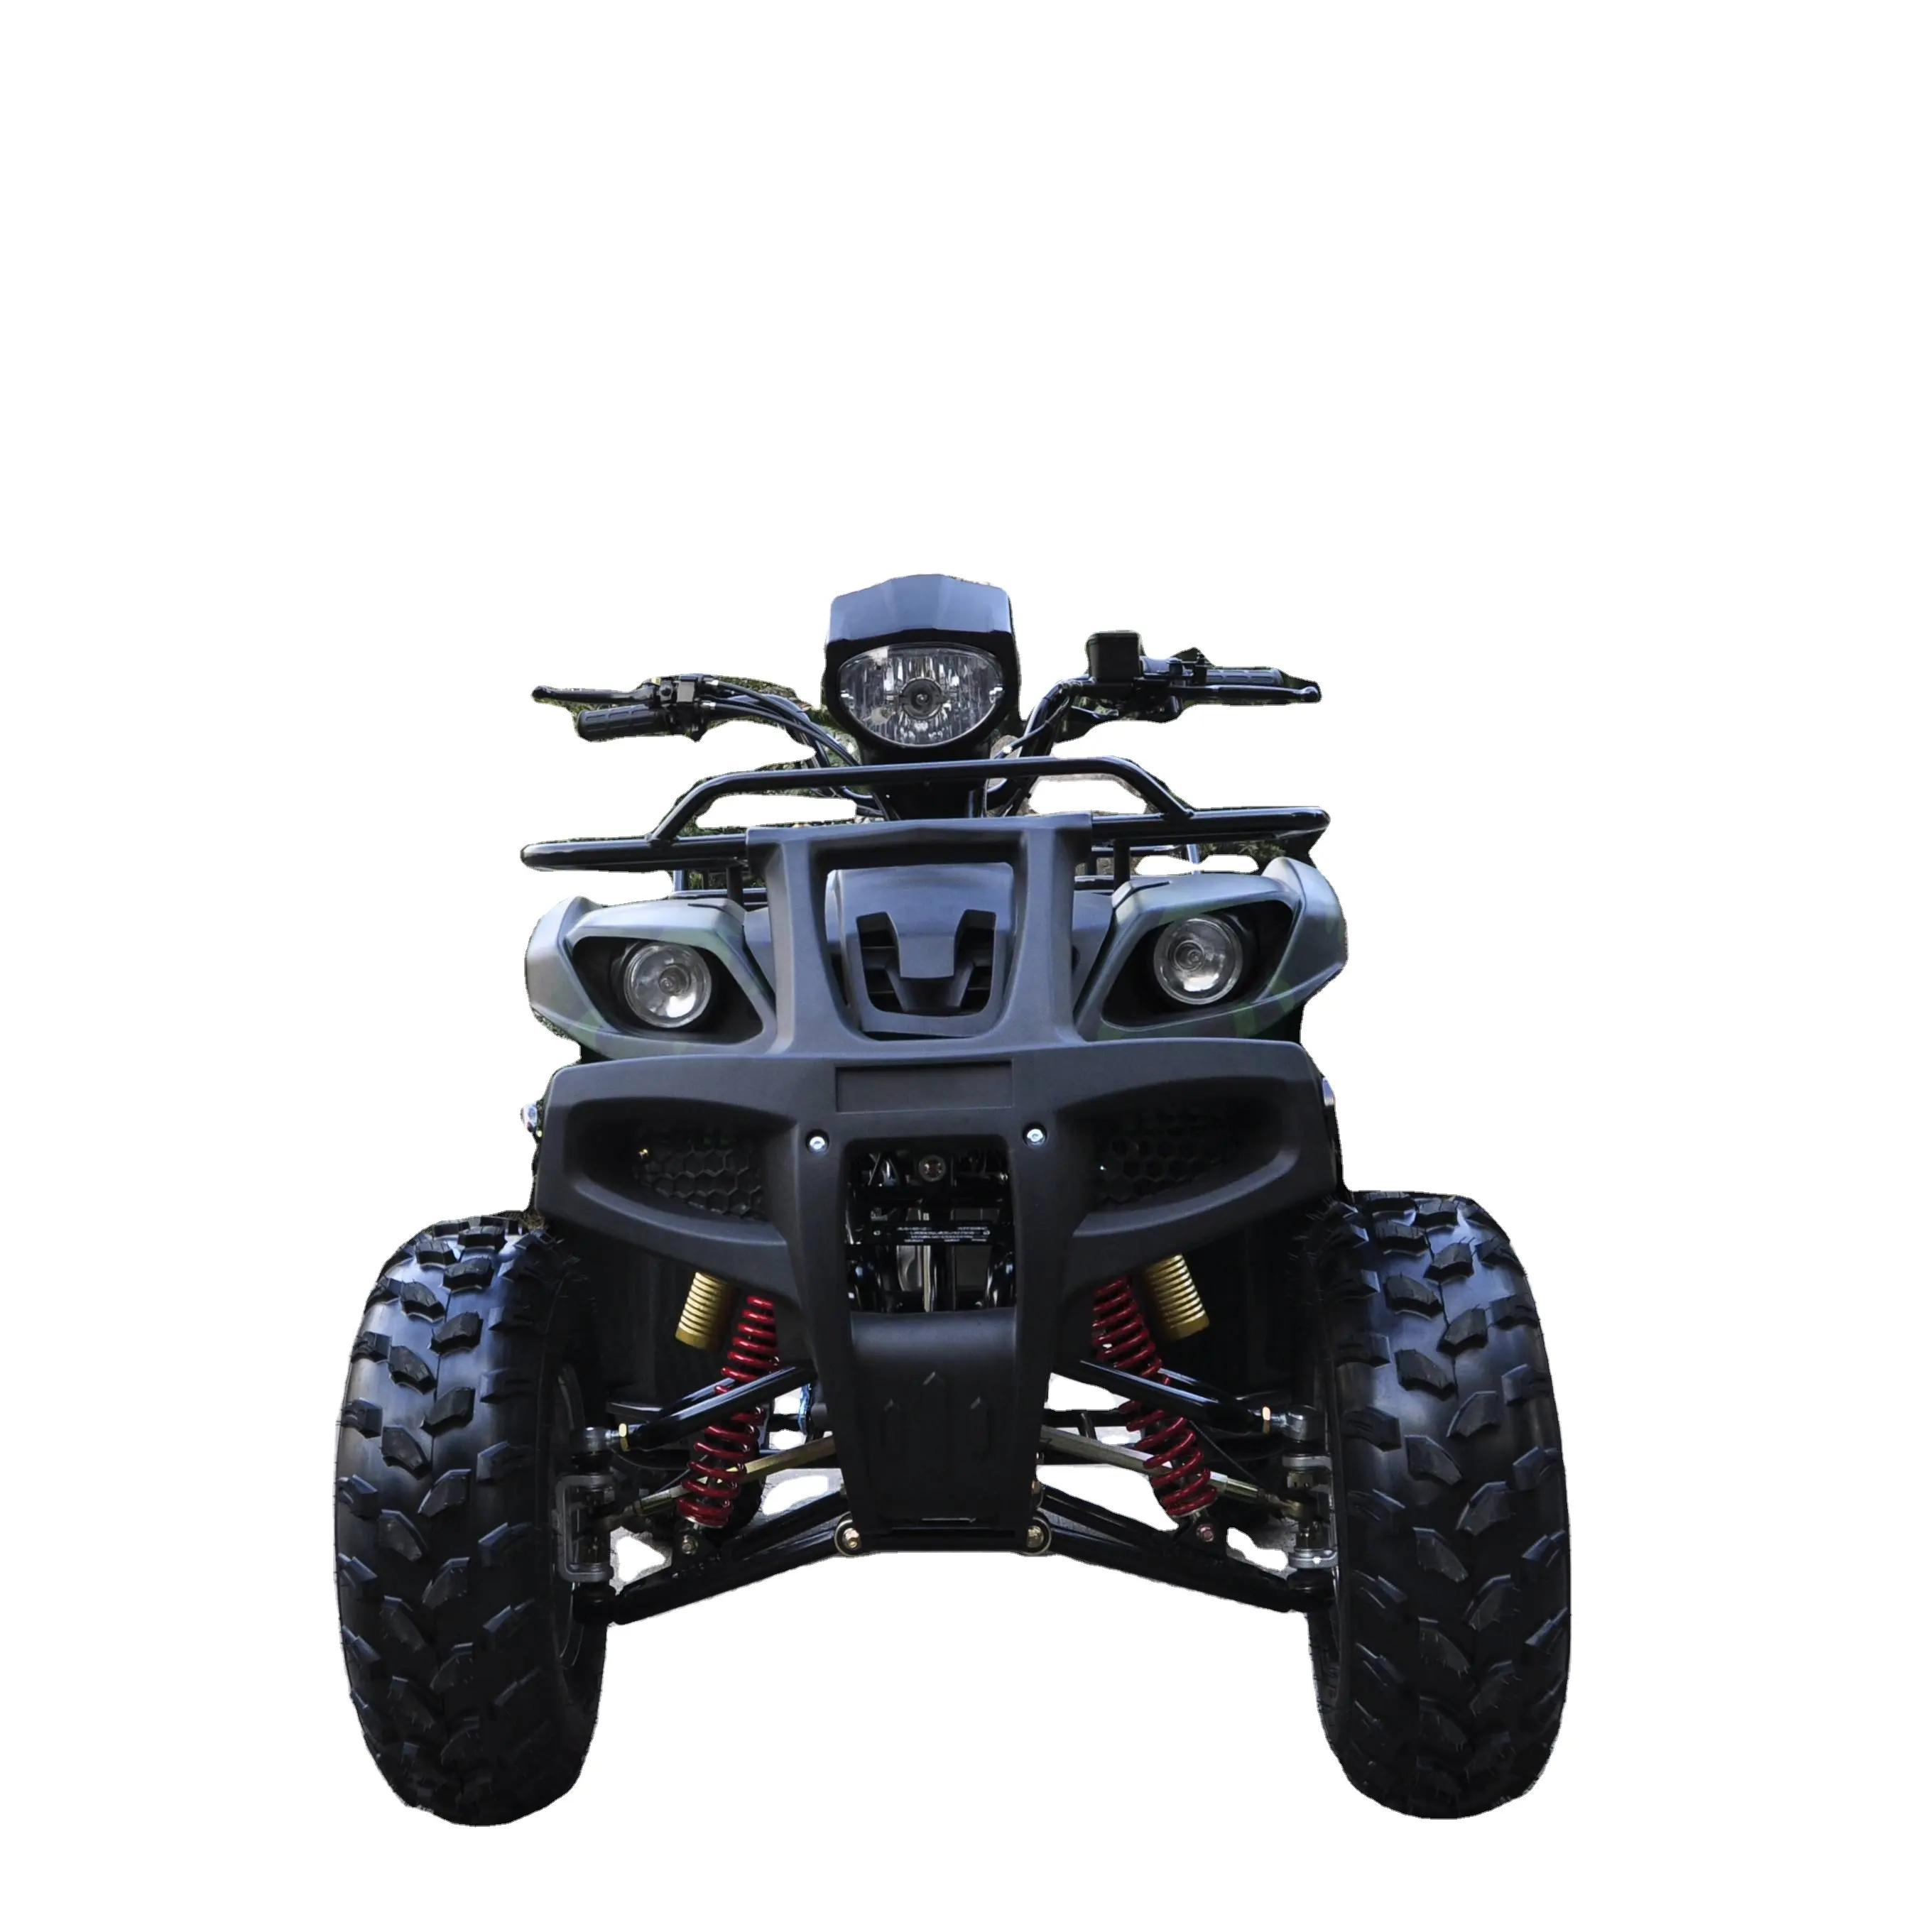 Hot Selling Adult Quad bike Sport camouflage 4 Wheeler Off-Road Motorcycles 150cc ATVs